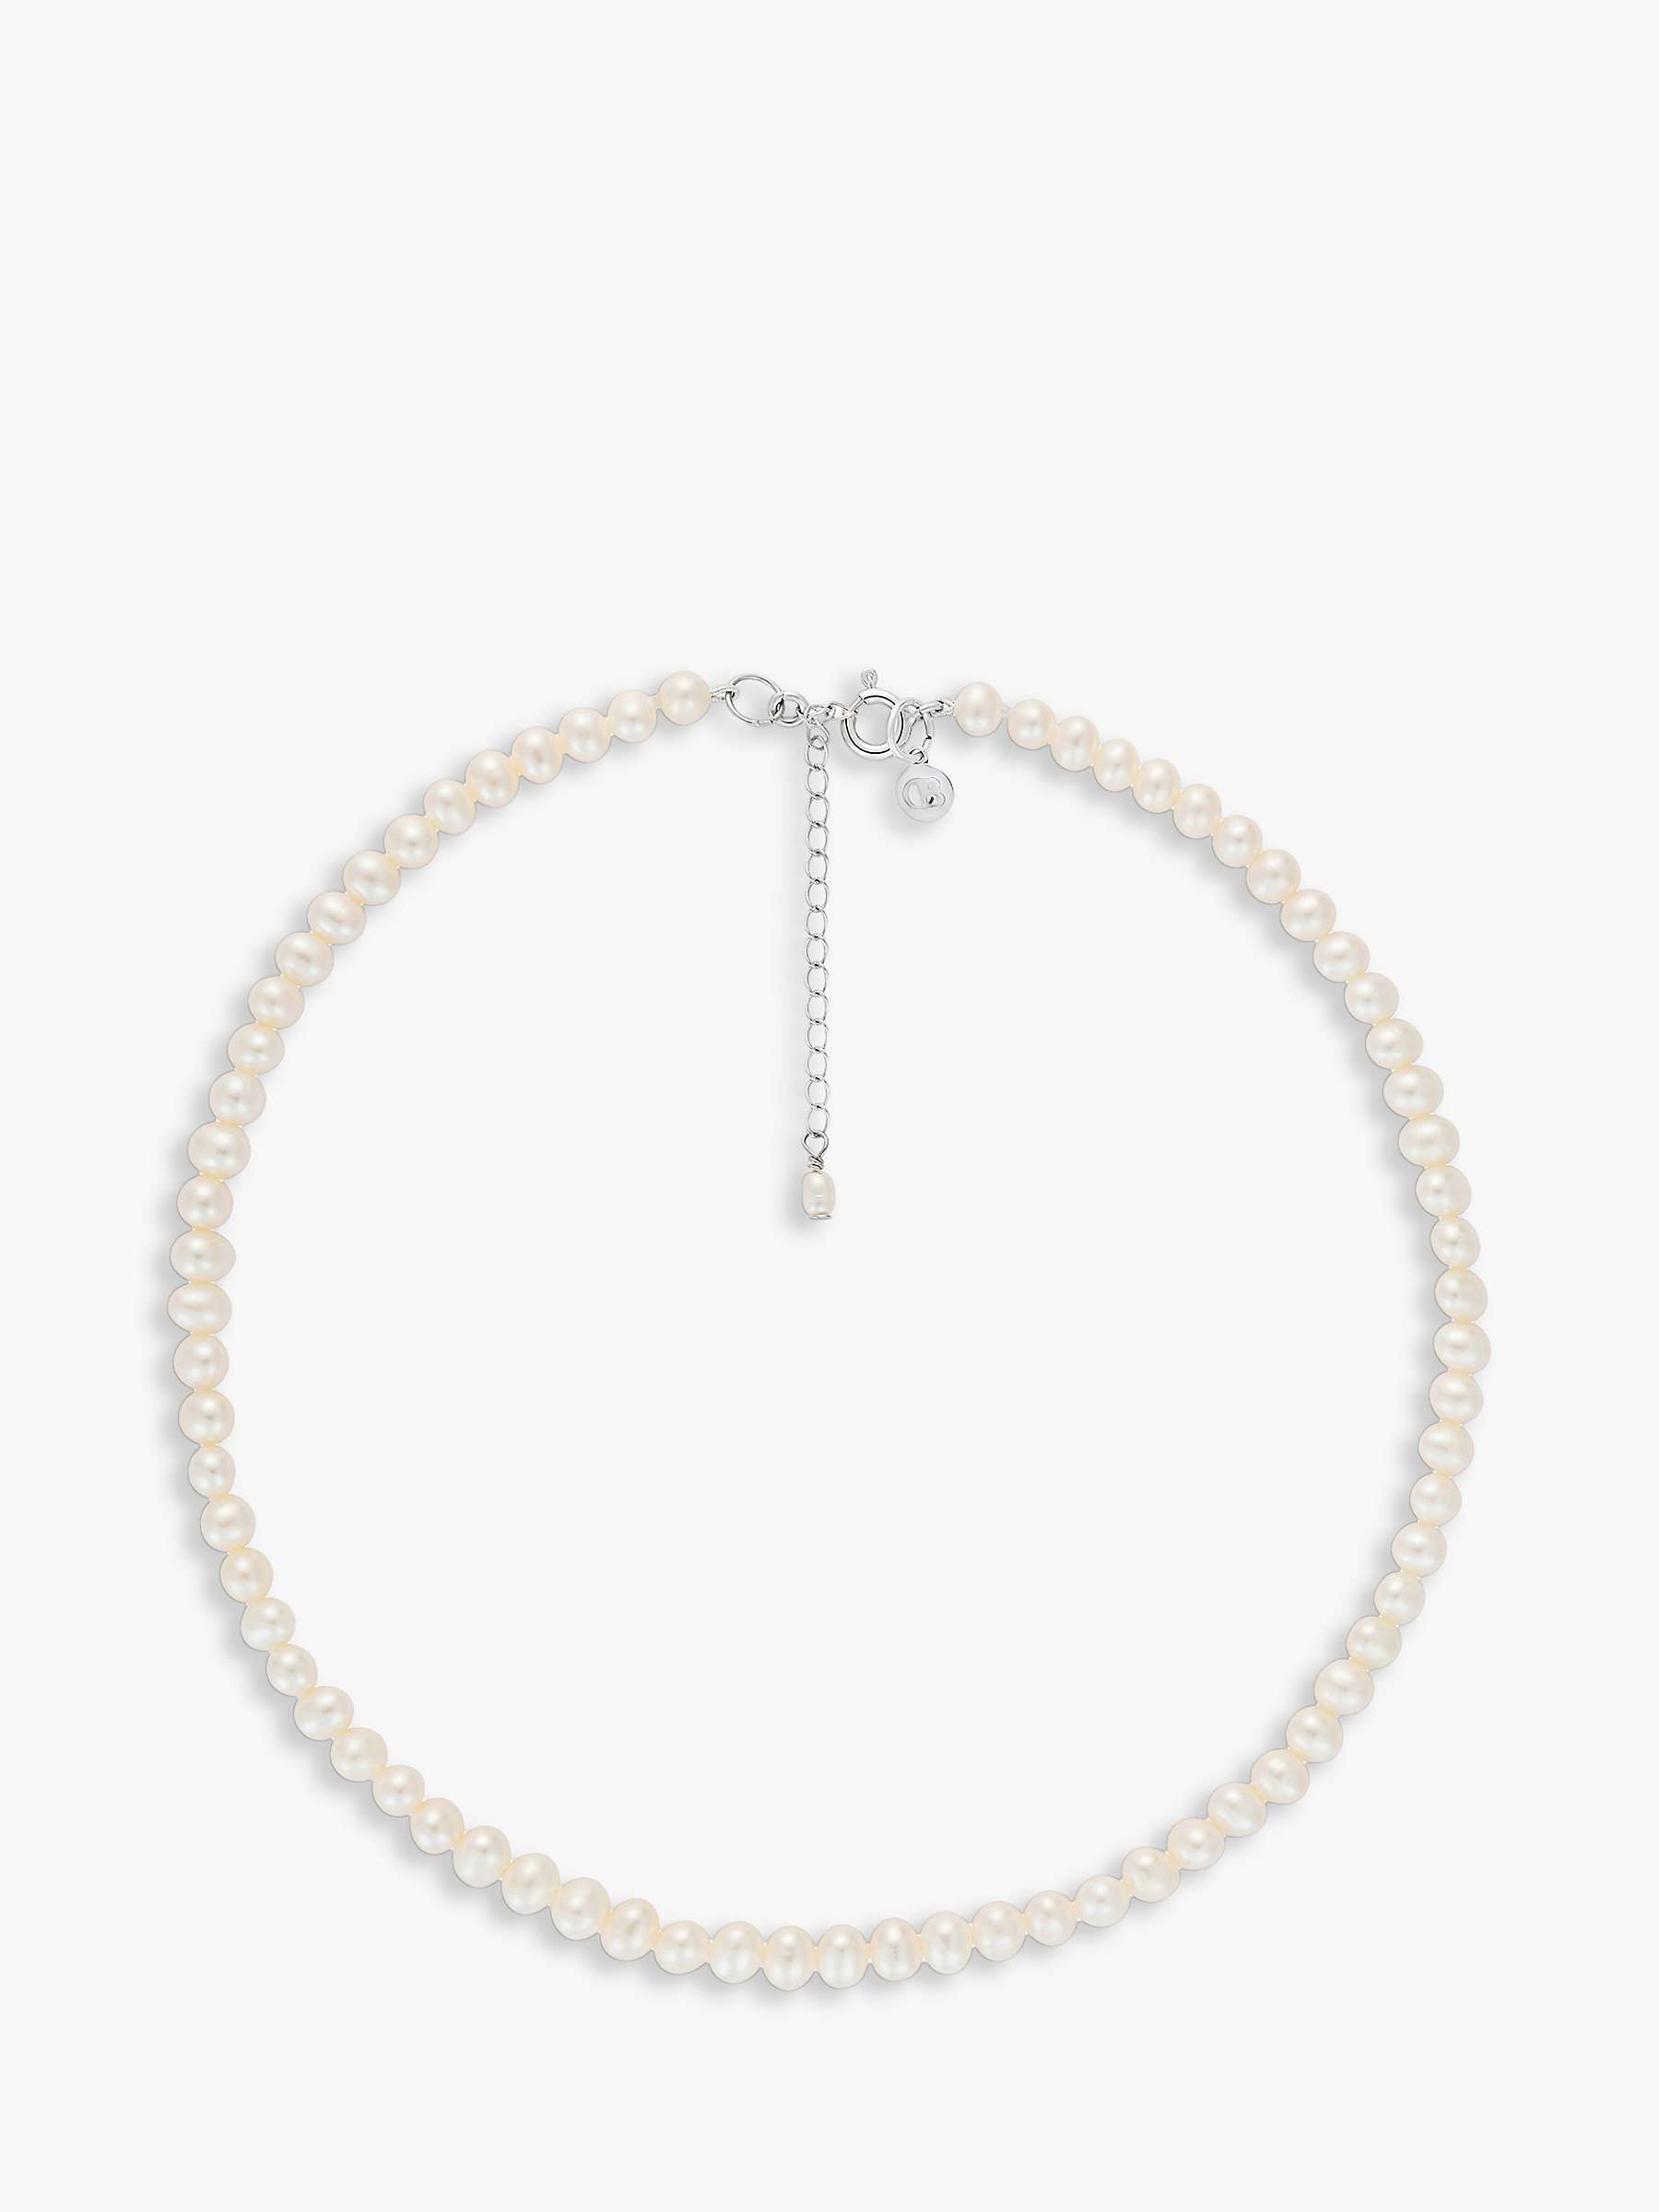 Buy Claudia Bradby Sterling Silver Freshwater Pearl Collar Necklace, White Online at johnlewis.com